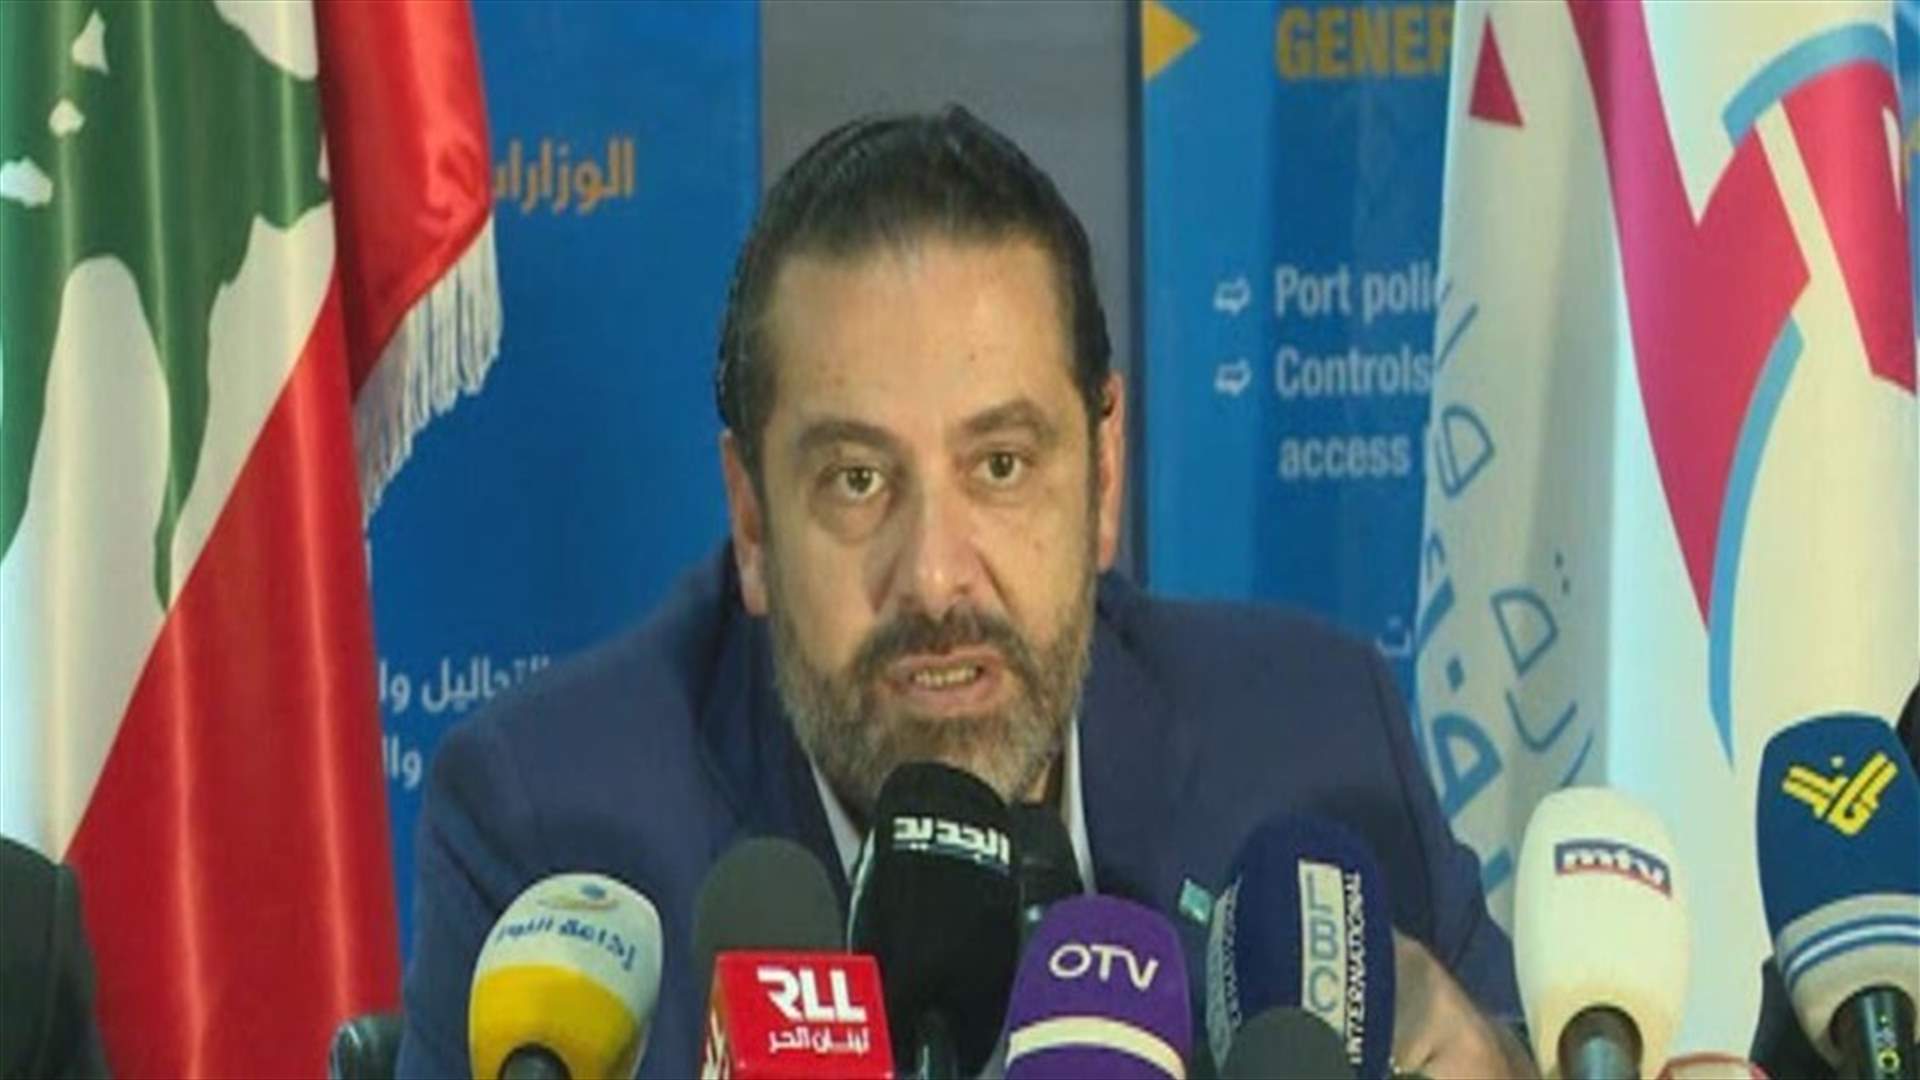 PM Hariri: Whoever attempts to smuggle through Beirut port will face the authorities